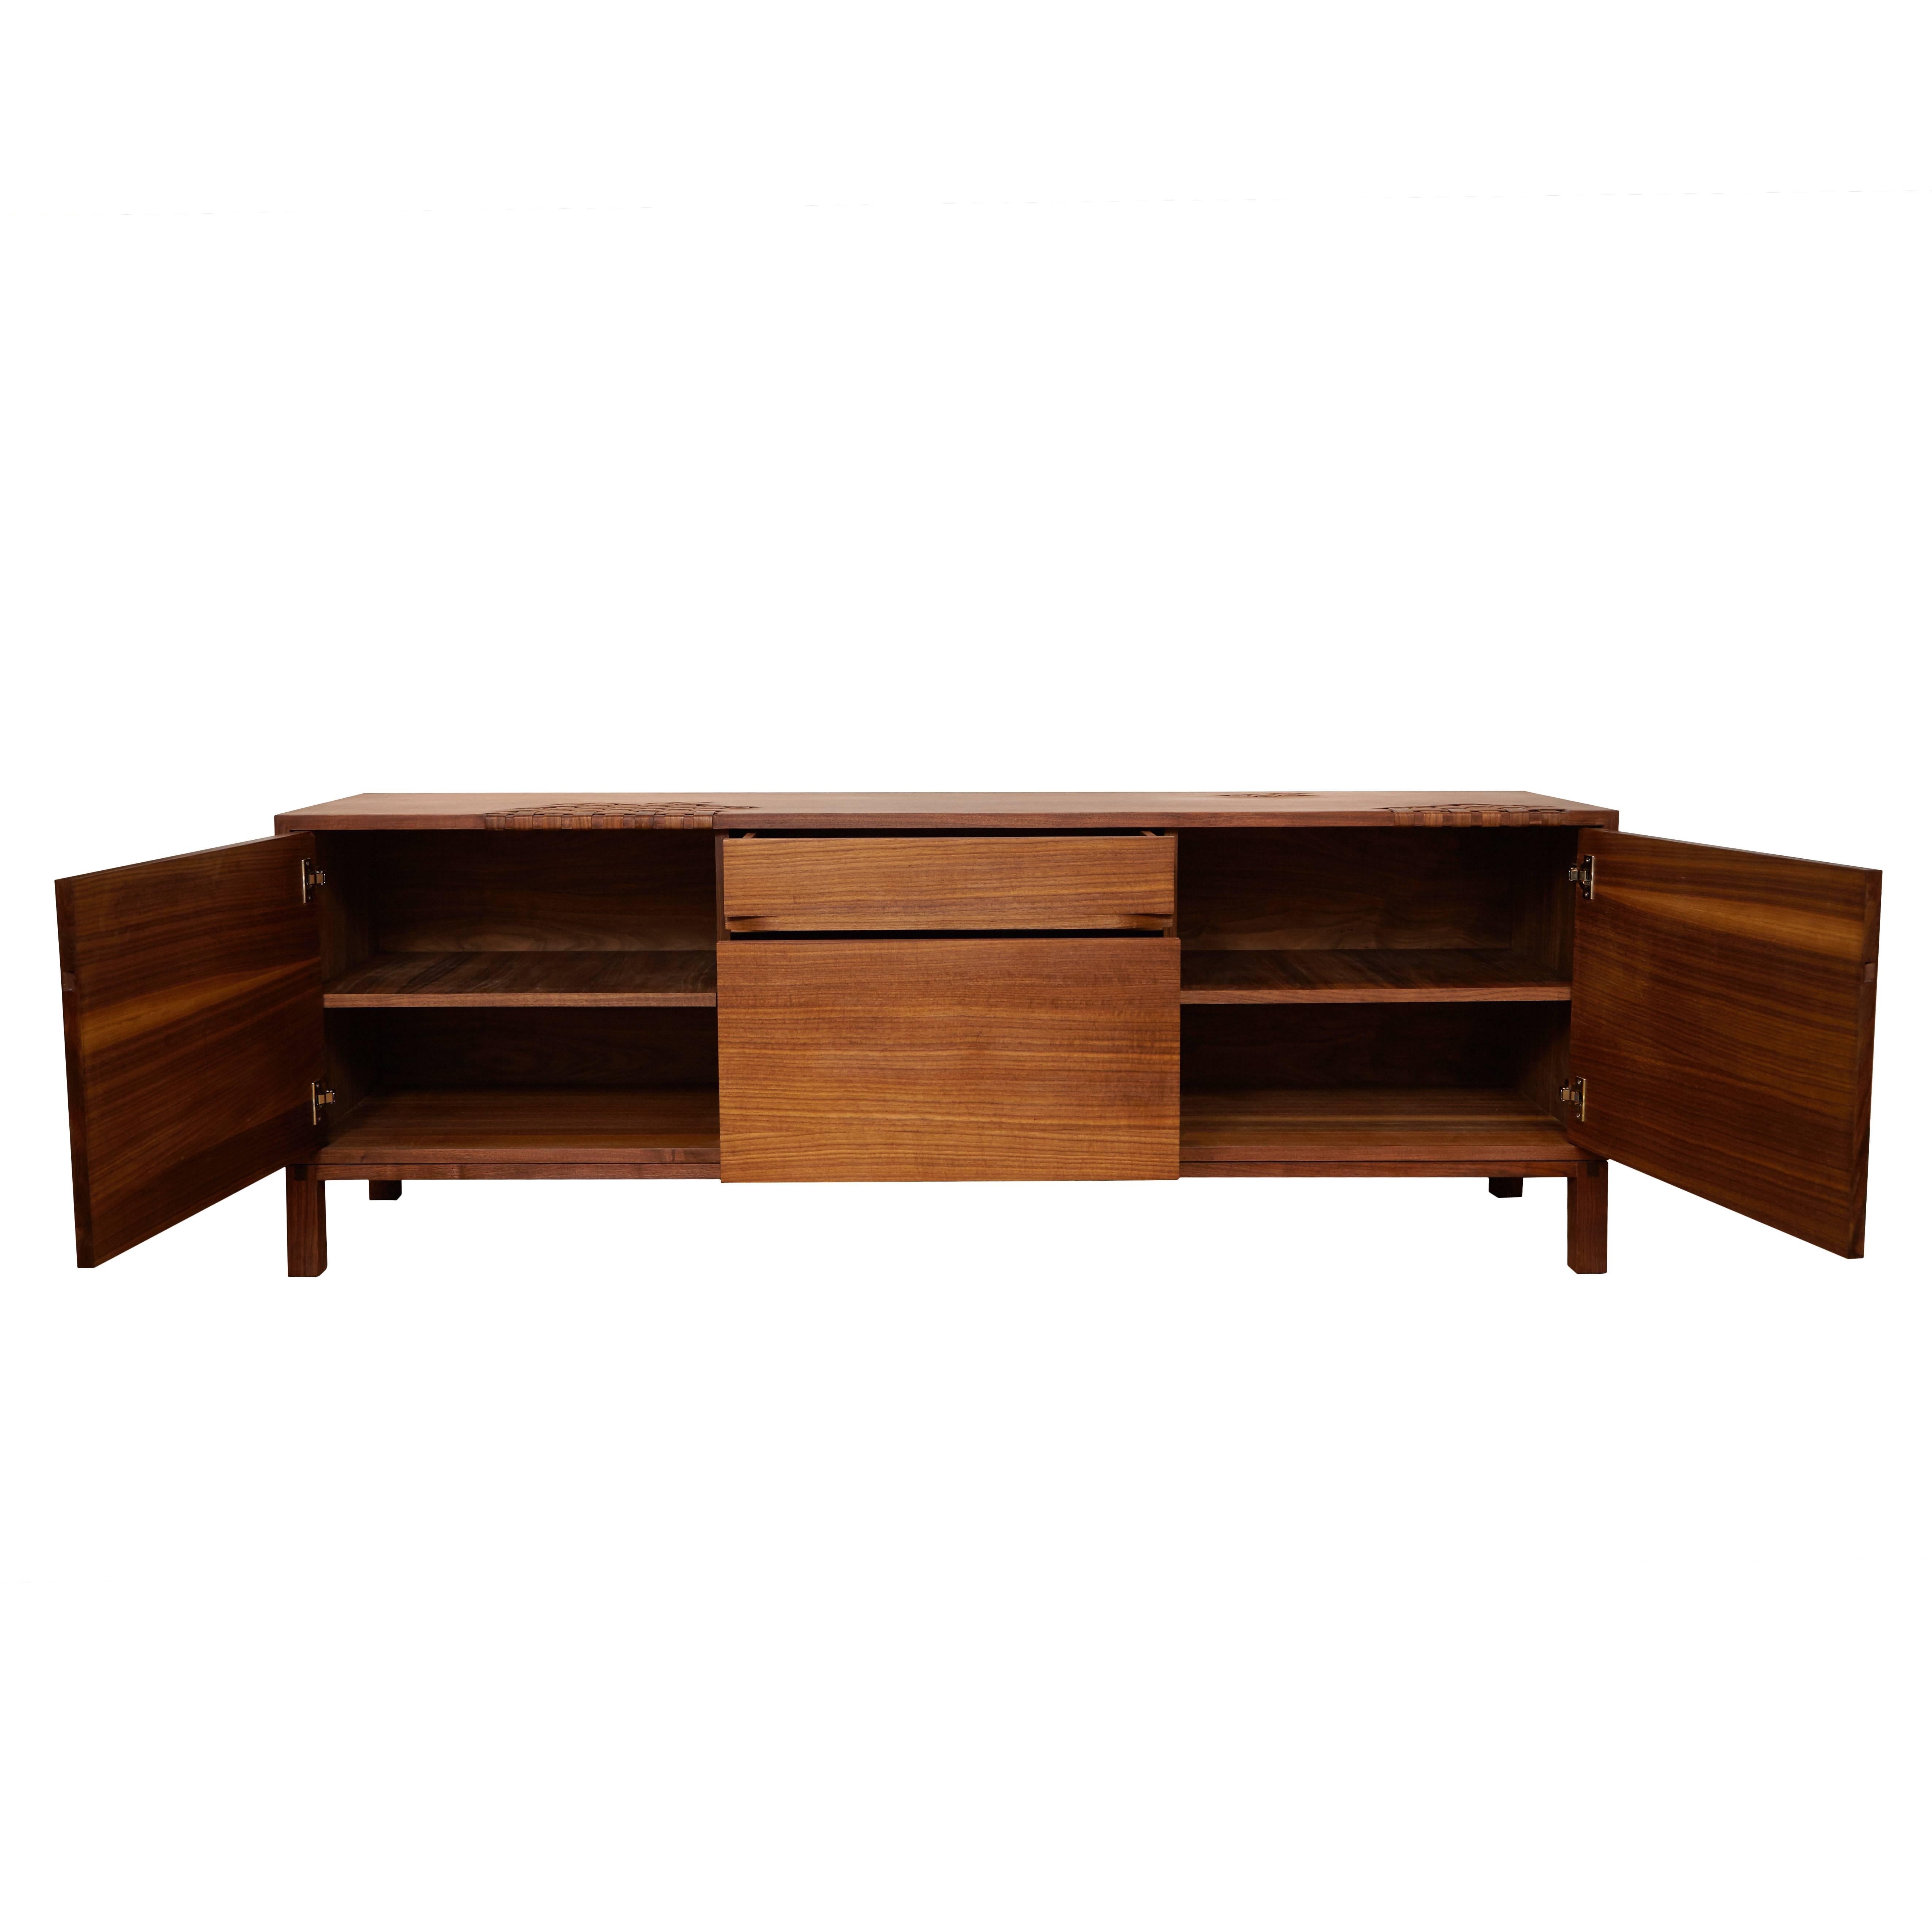 American Craftsman Walnut Weave Credenza by Don Howell For Sale